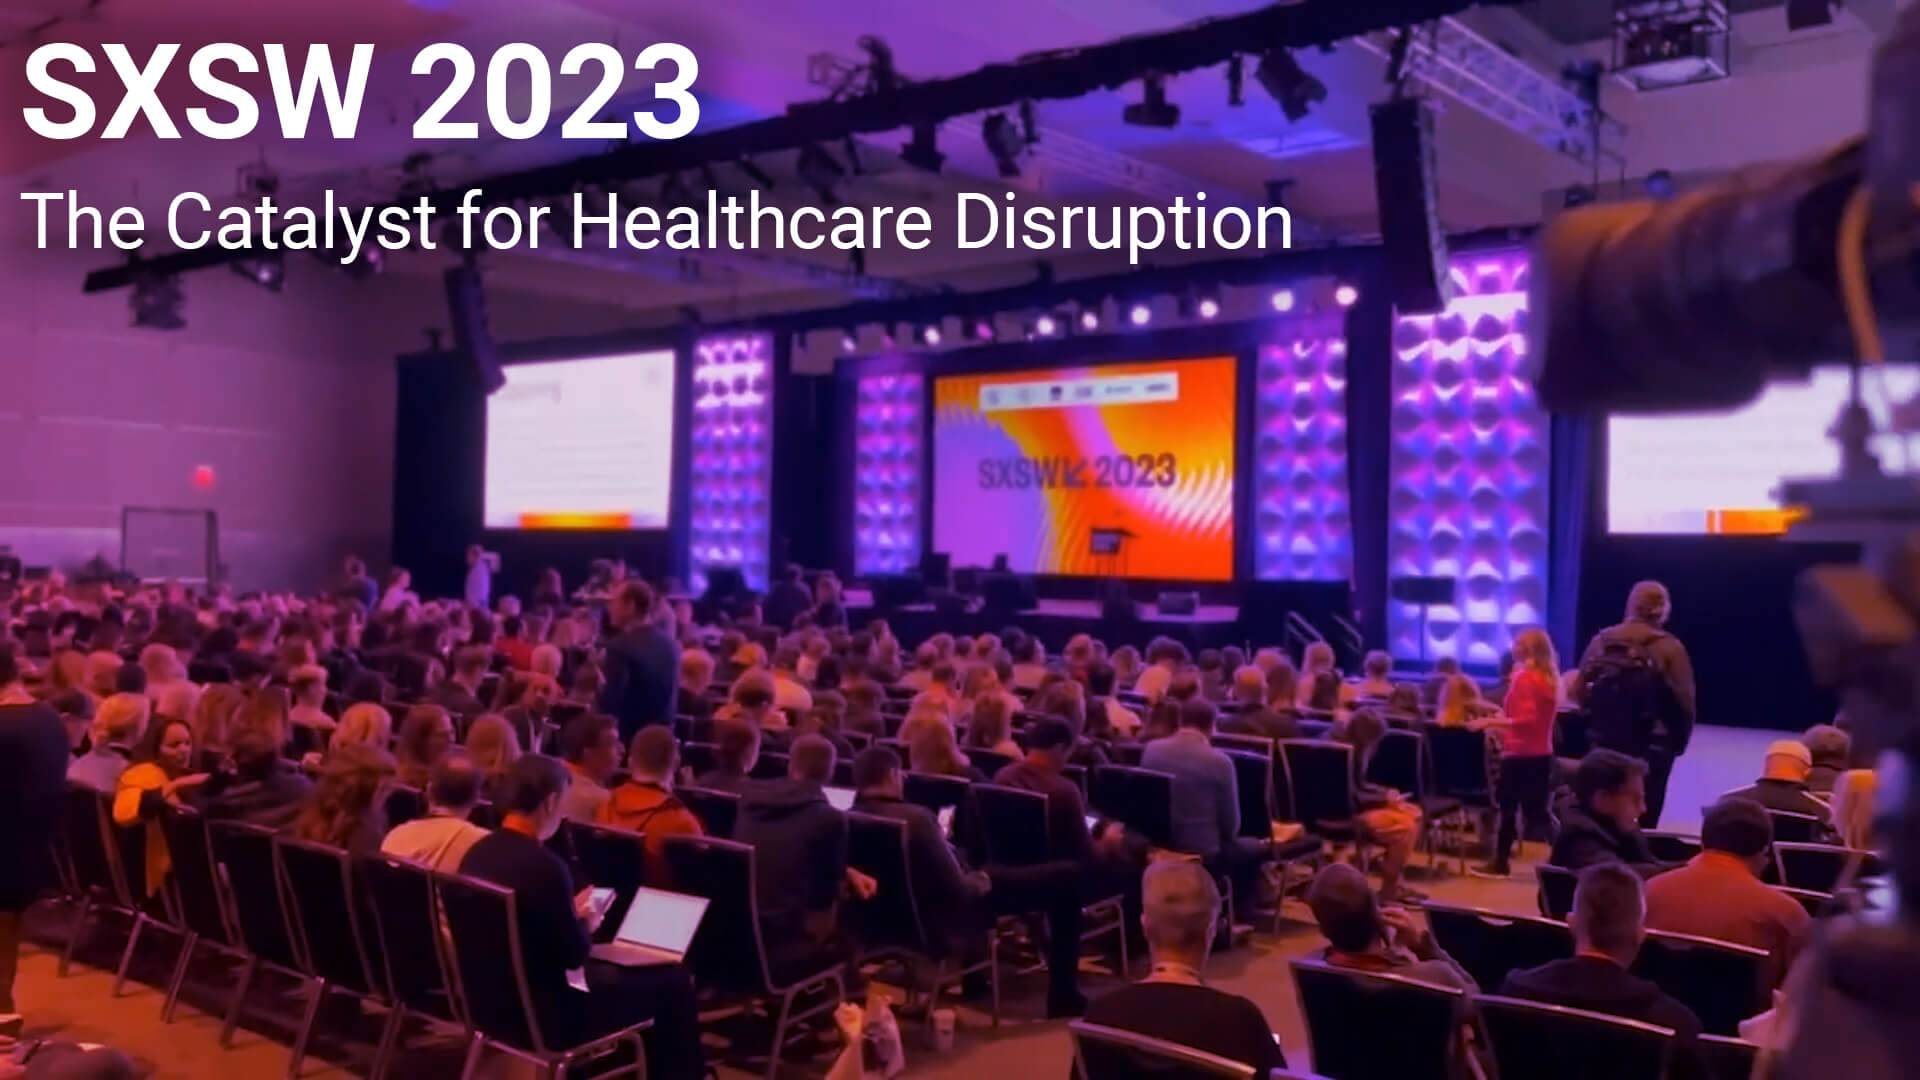 Picture of a full auditorium at SXSW 2023 and title "The Catalyst for Healthcare Disruption."